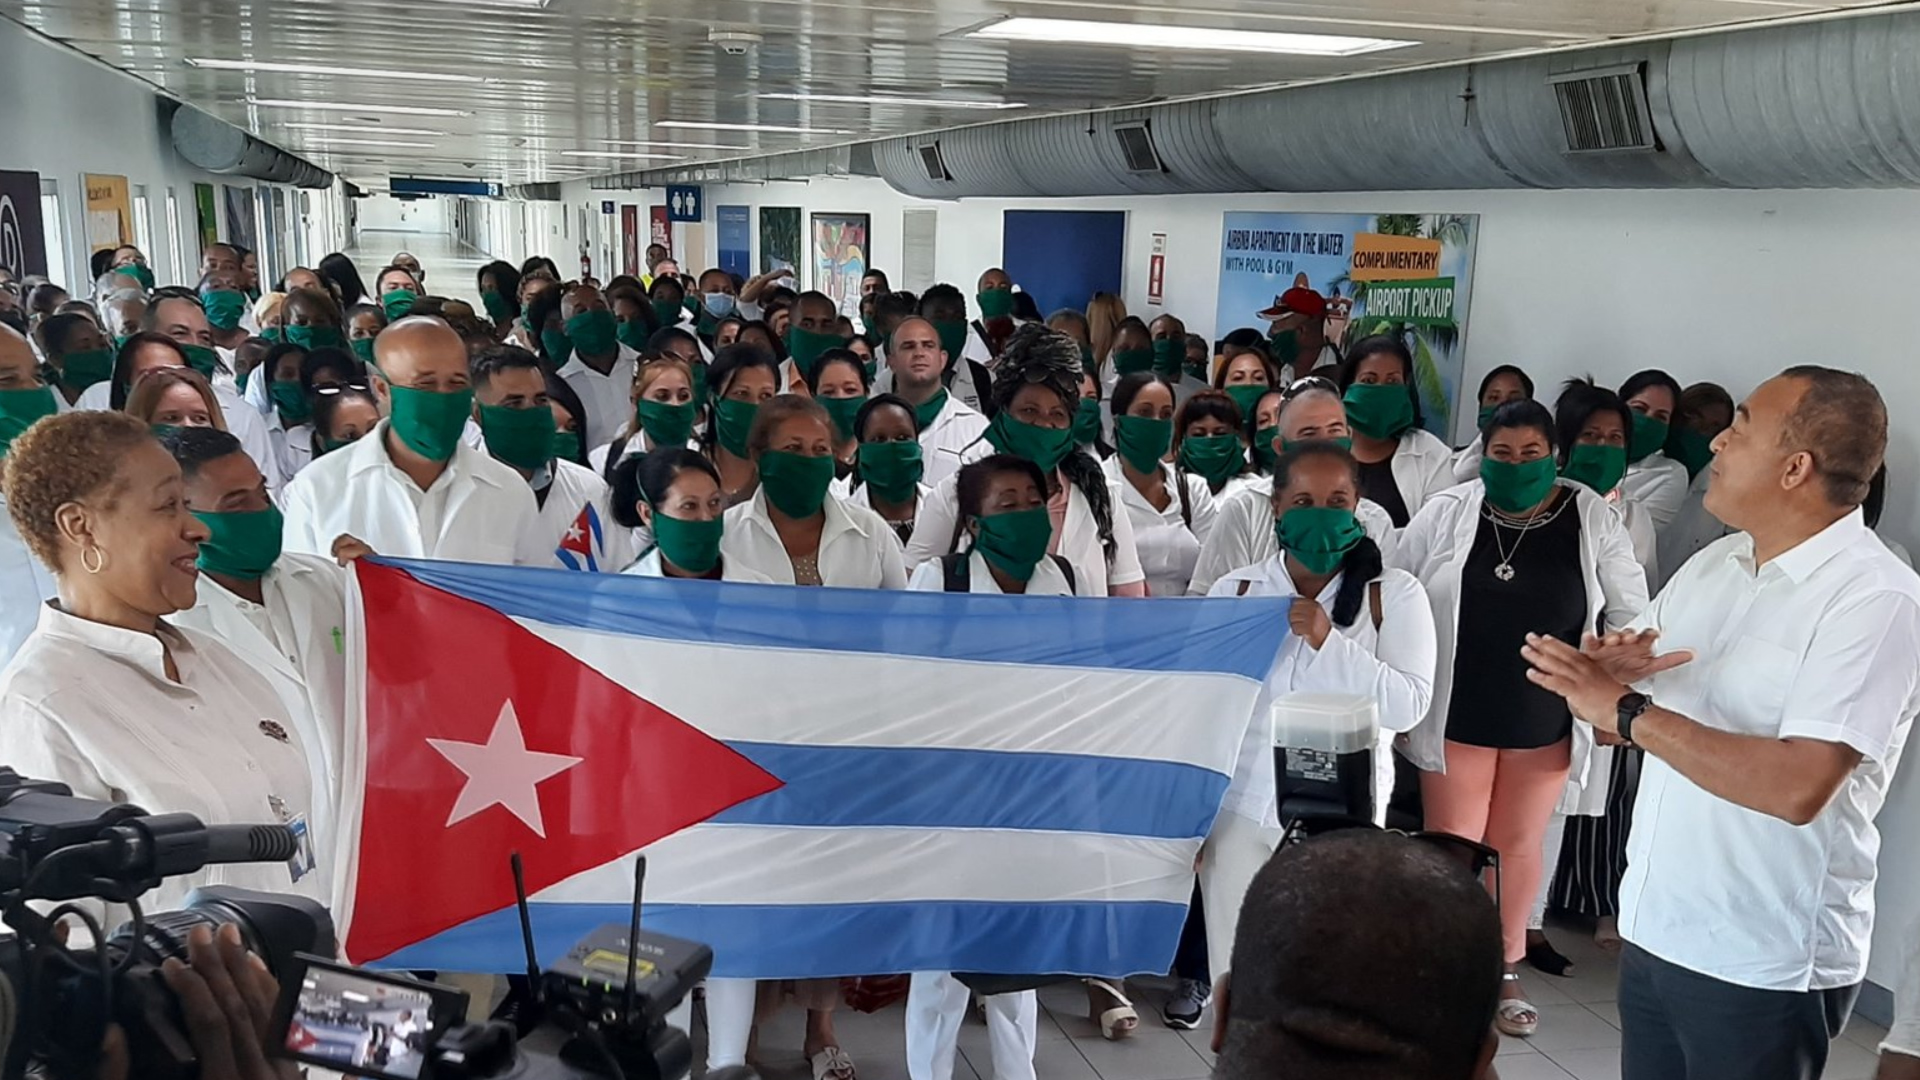 140 medical professionals from Cuba arrive in Jamaica to help fight against COVID-19